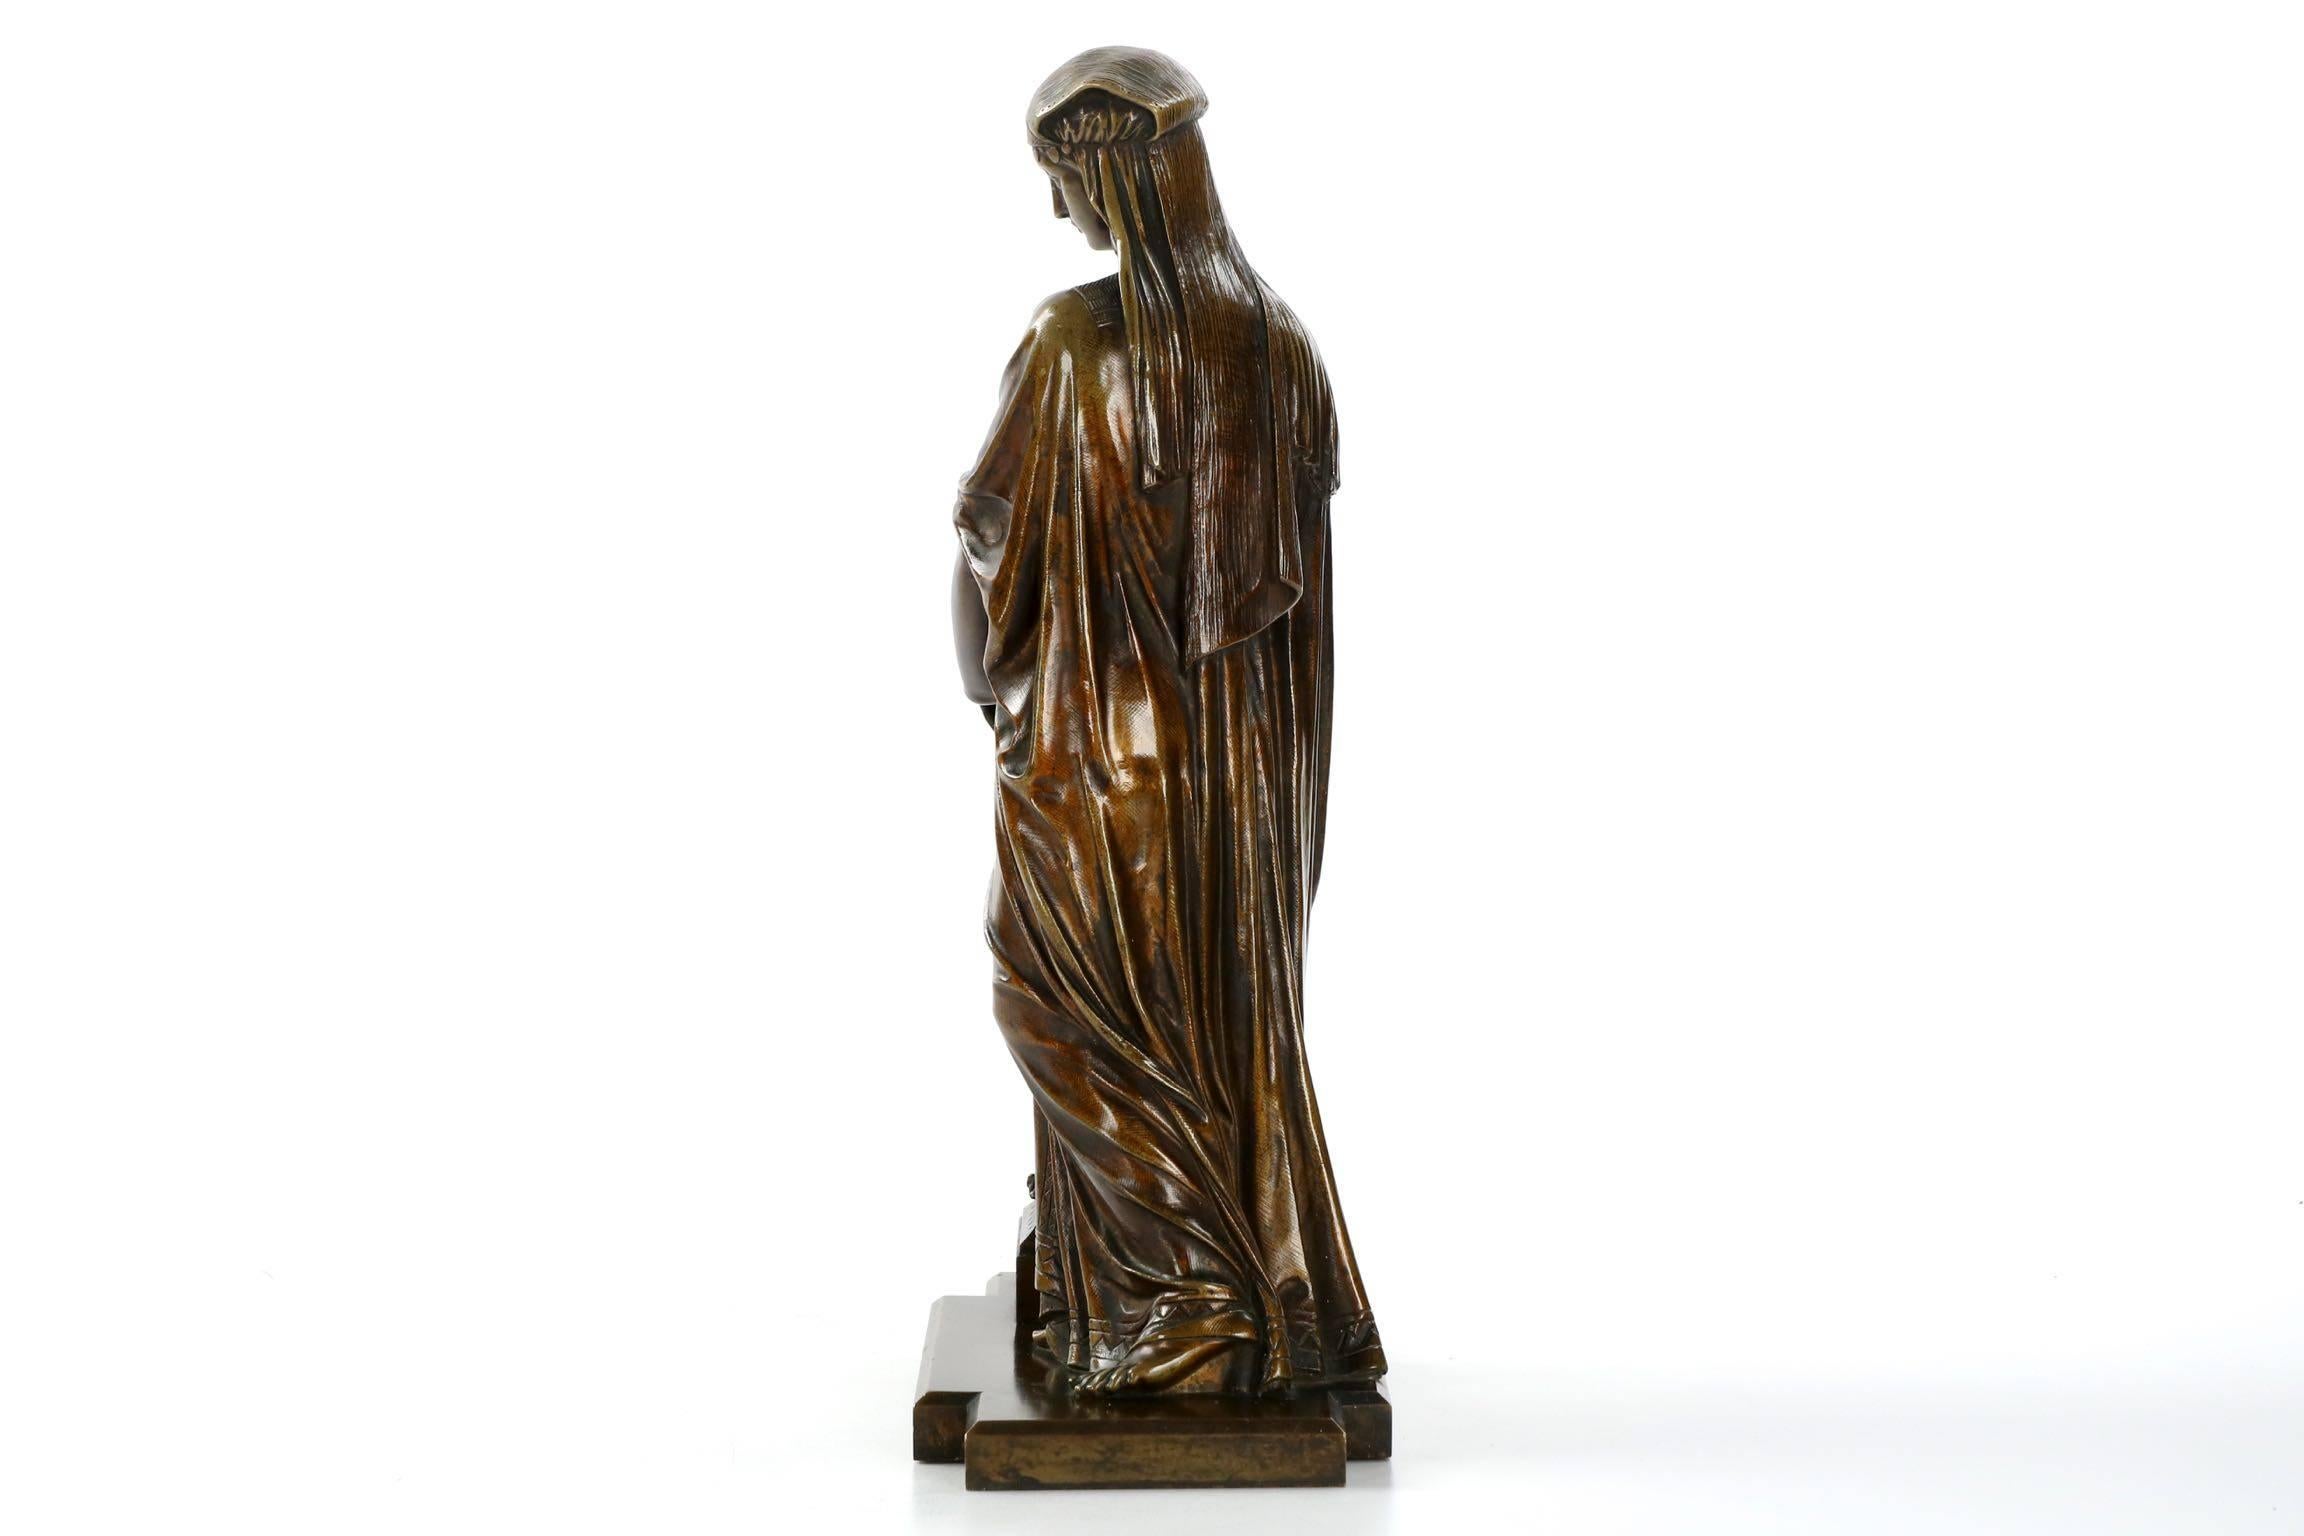 The standing female is lost in thought as she pauses, leaning on the vase she has resting on a plinth, perhaps waiting for a chance to fill her vase with water from the well. An exquisitely cast work by an unknown sculptor of the period, her dress